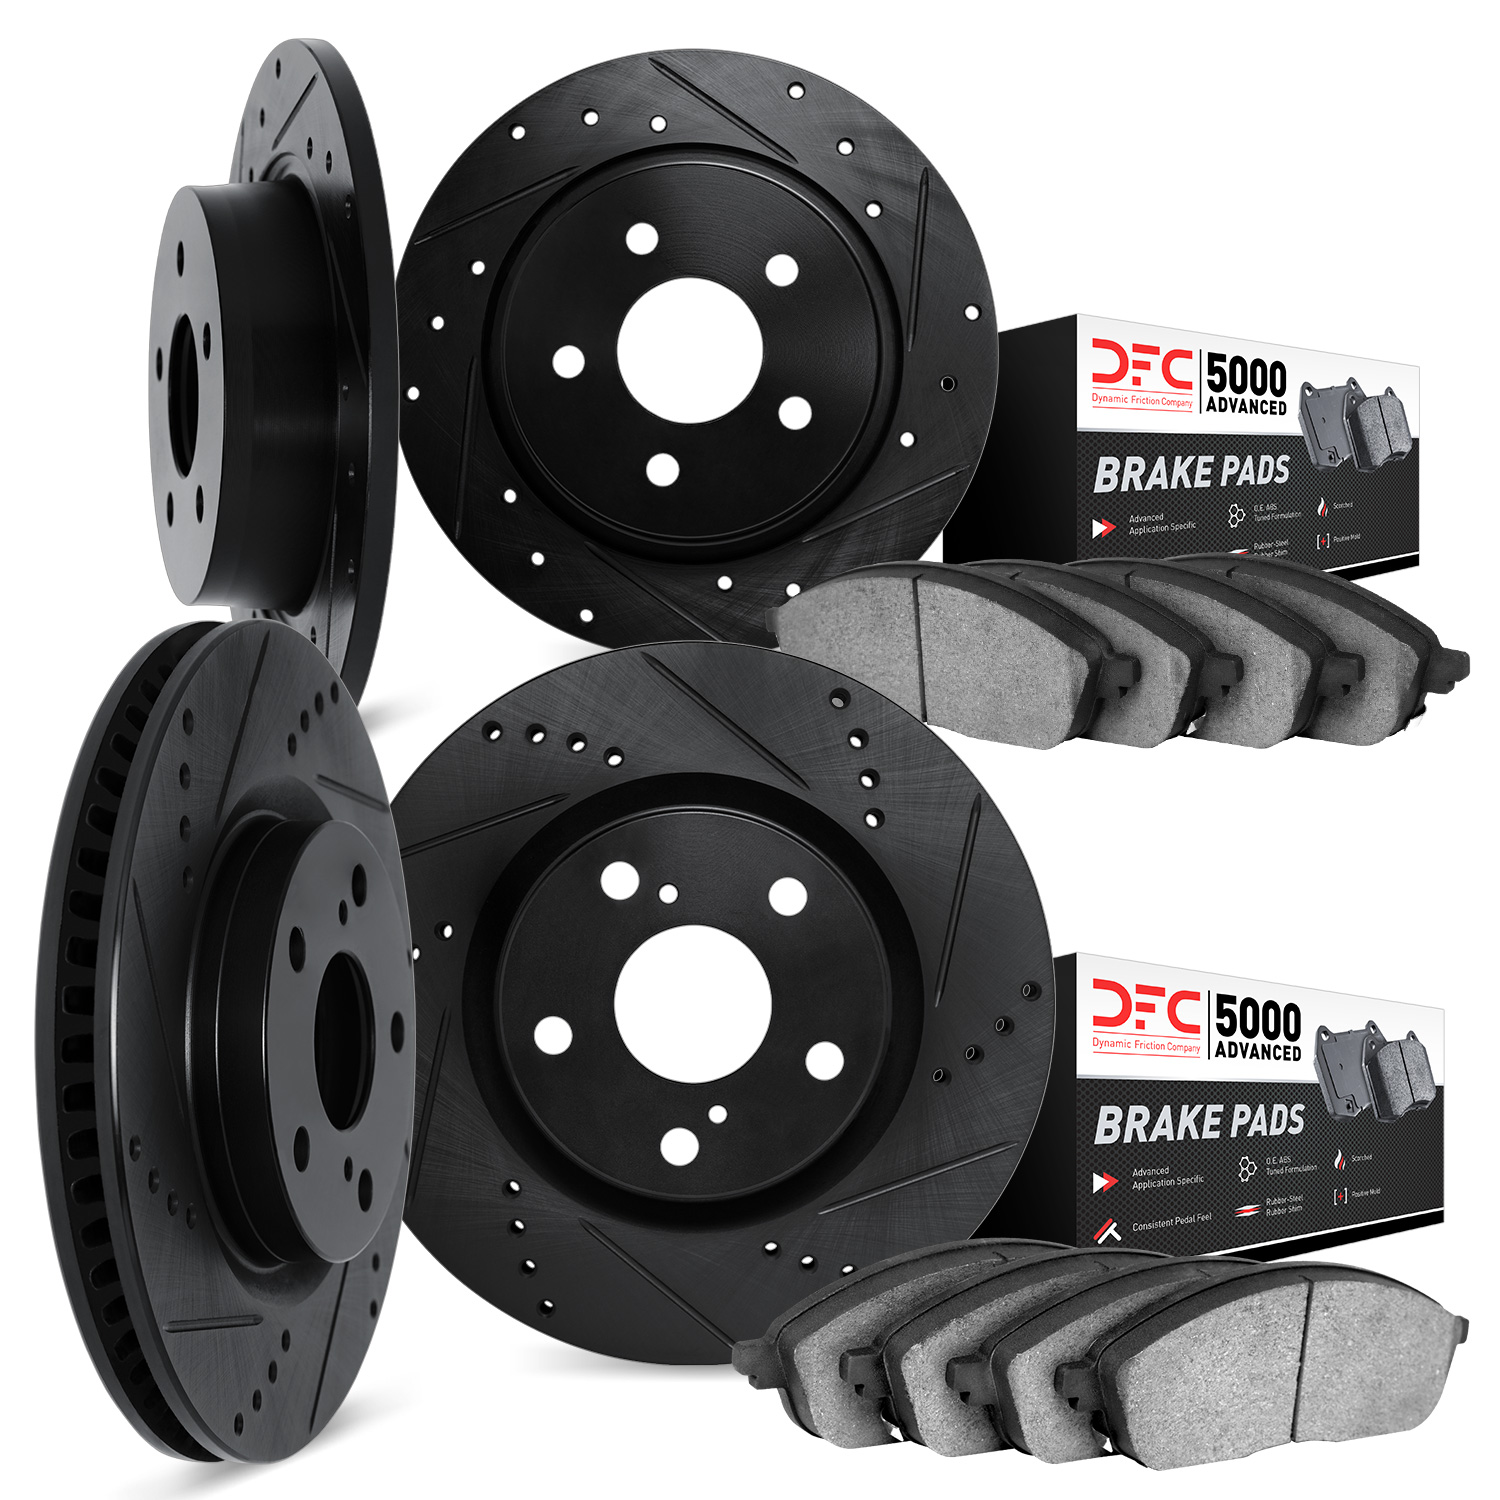 8504-76145 Drilled/Slotted Brake Rotors w/5000 Advanced Brake Pads Kit [Black], 1996-1999 Lexus/Toyota/Scion, Position: Front an